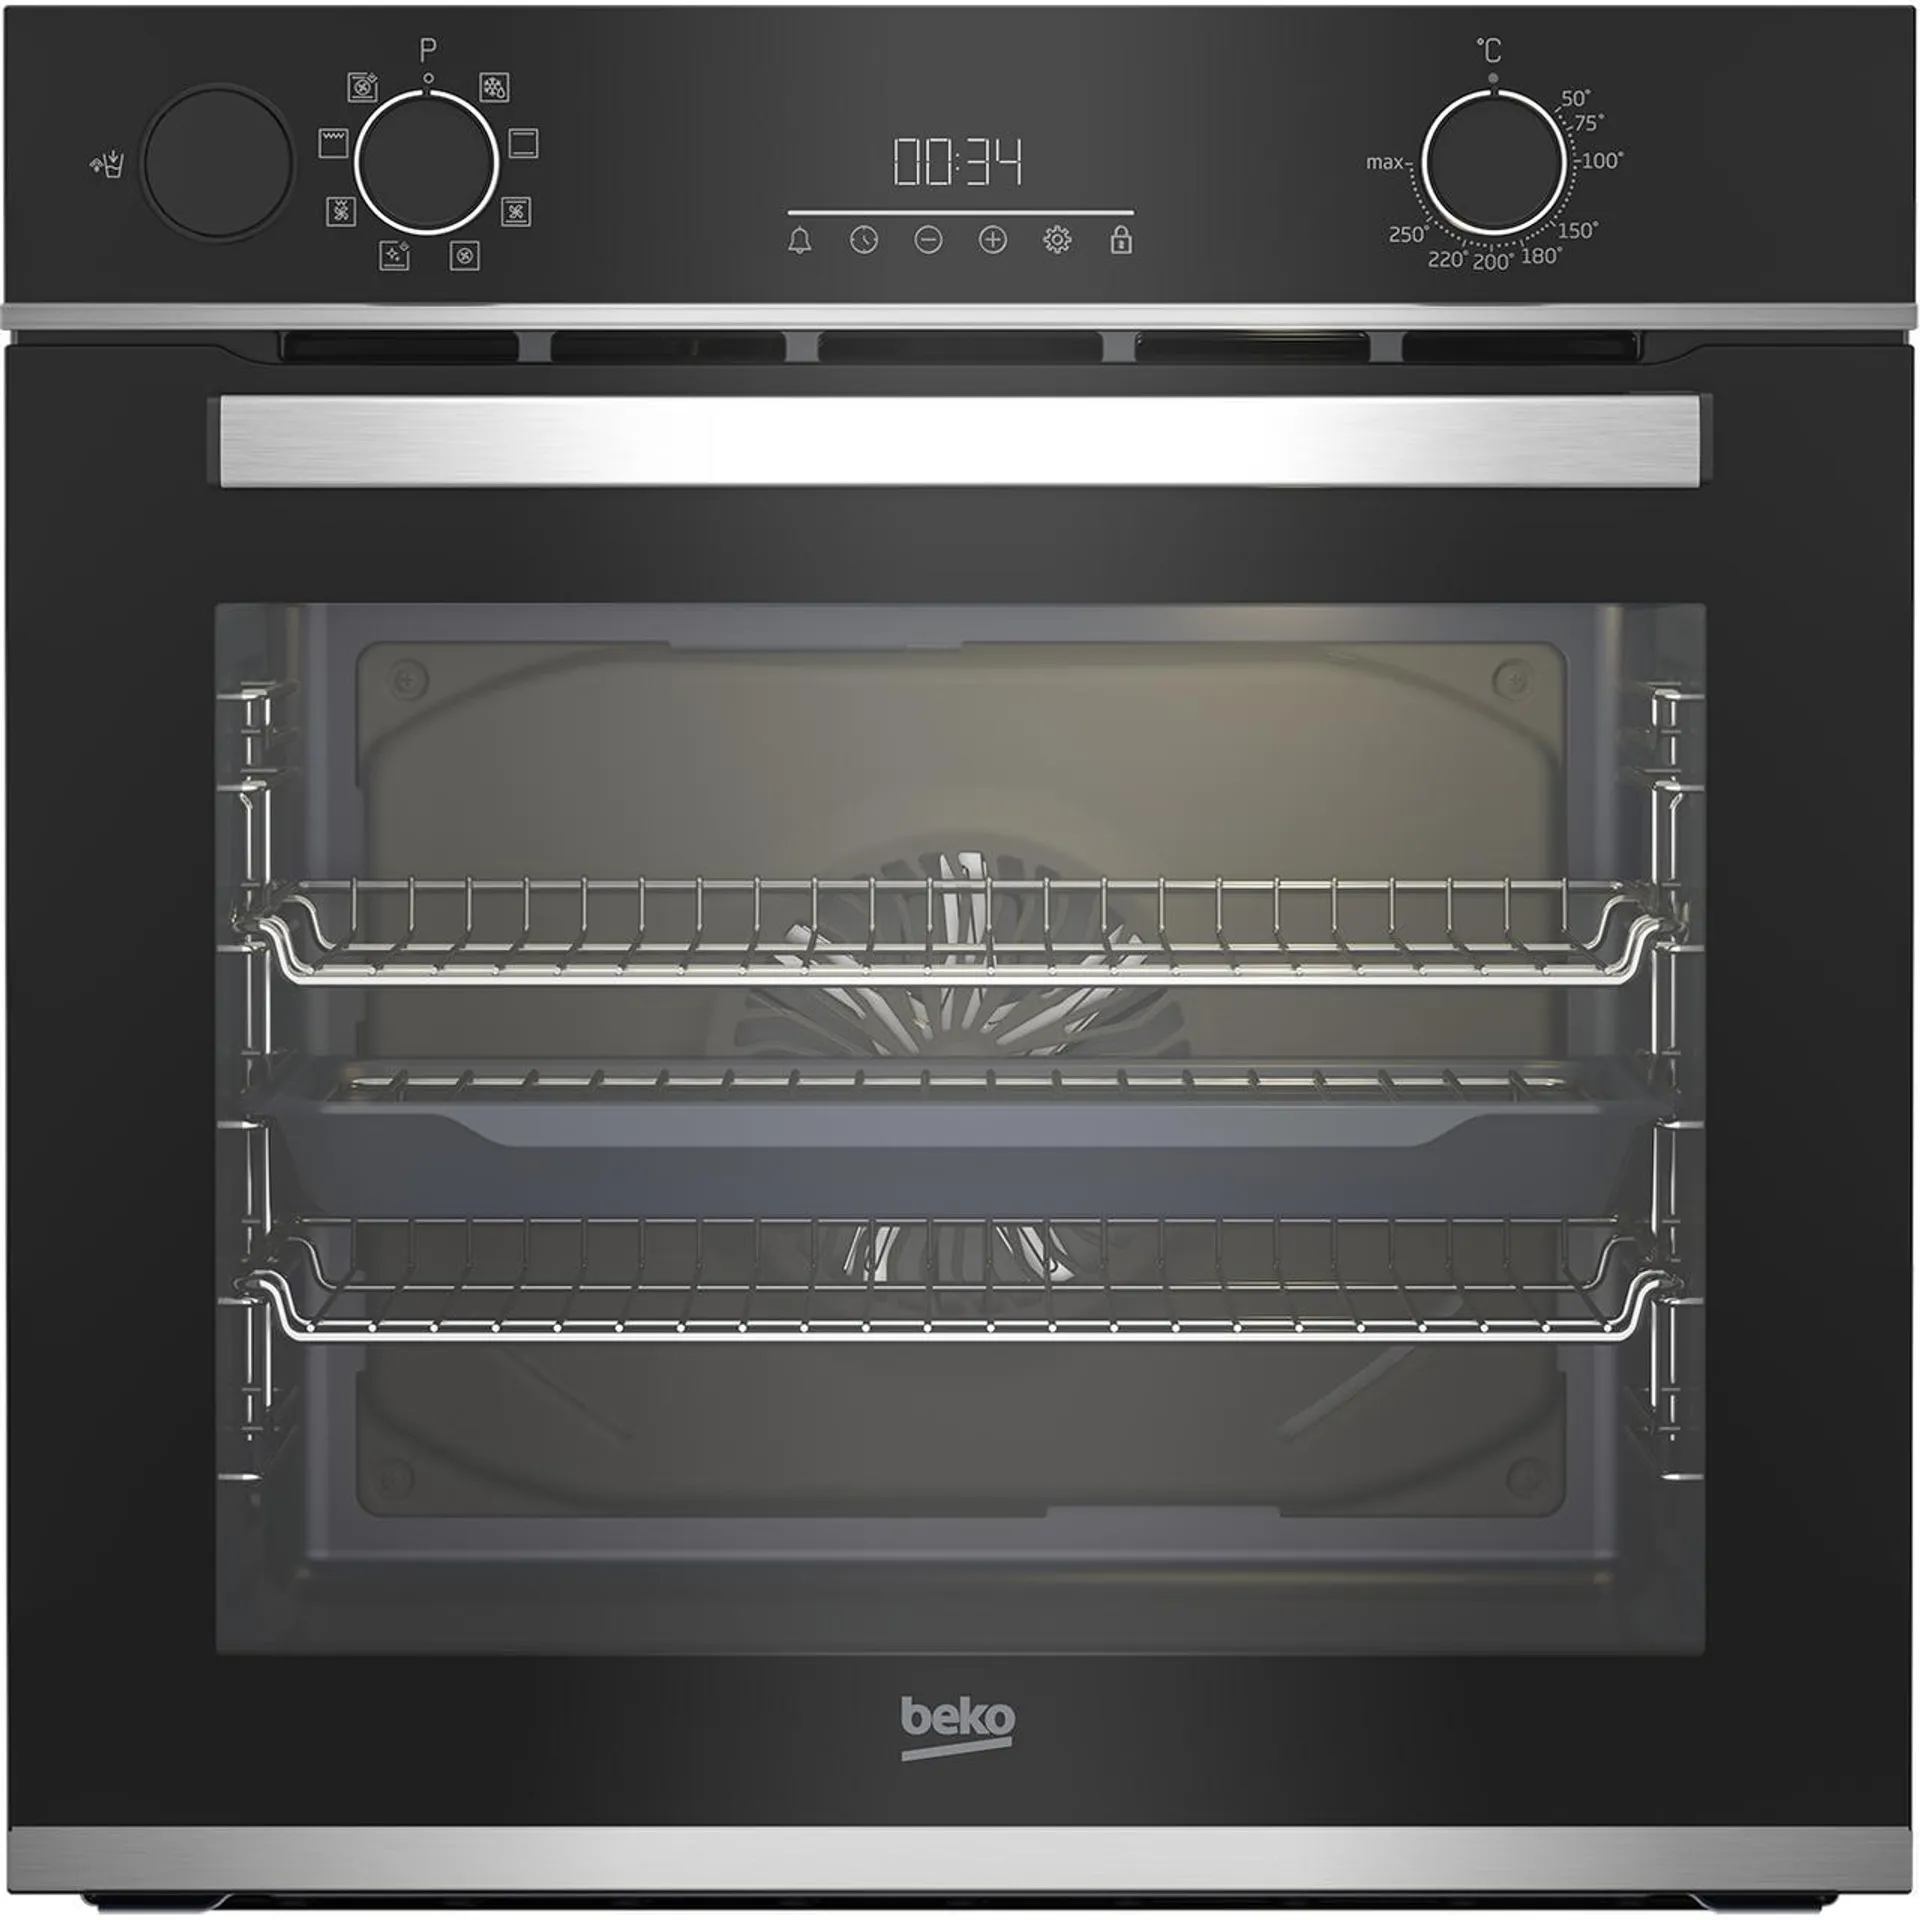 Beko AeroPerfect™ RecycledNet® BBIS25300XC Built In Electric Single Oven with added Steam Function - Stainless Steel - A Rated